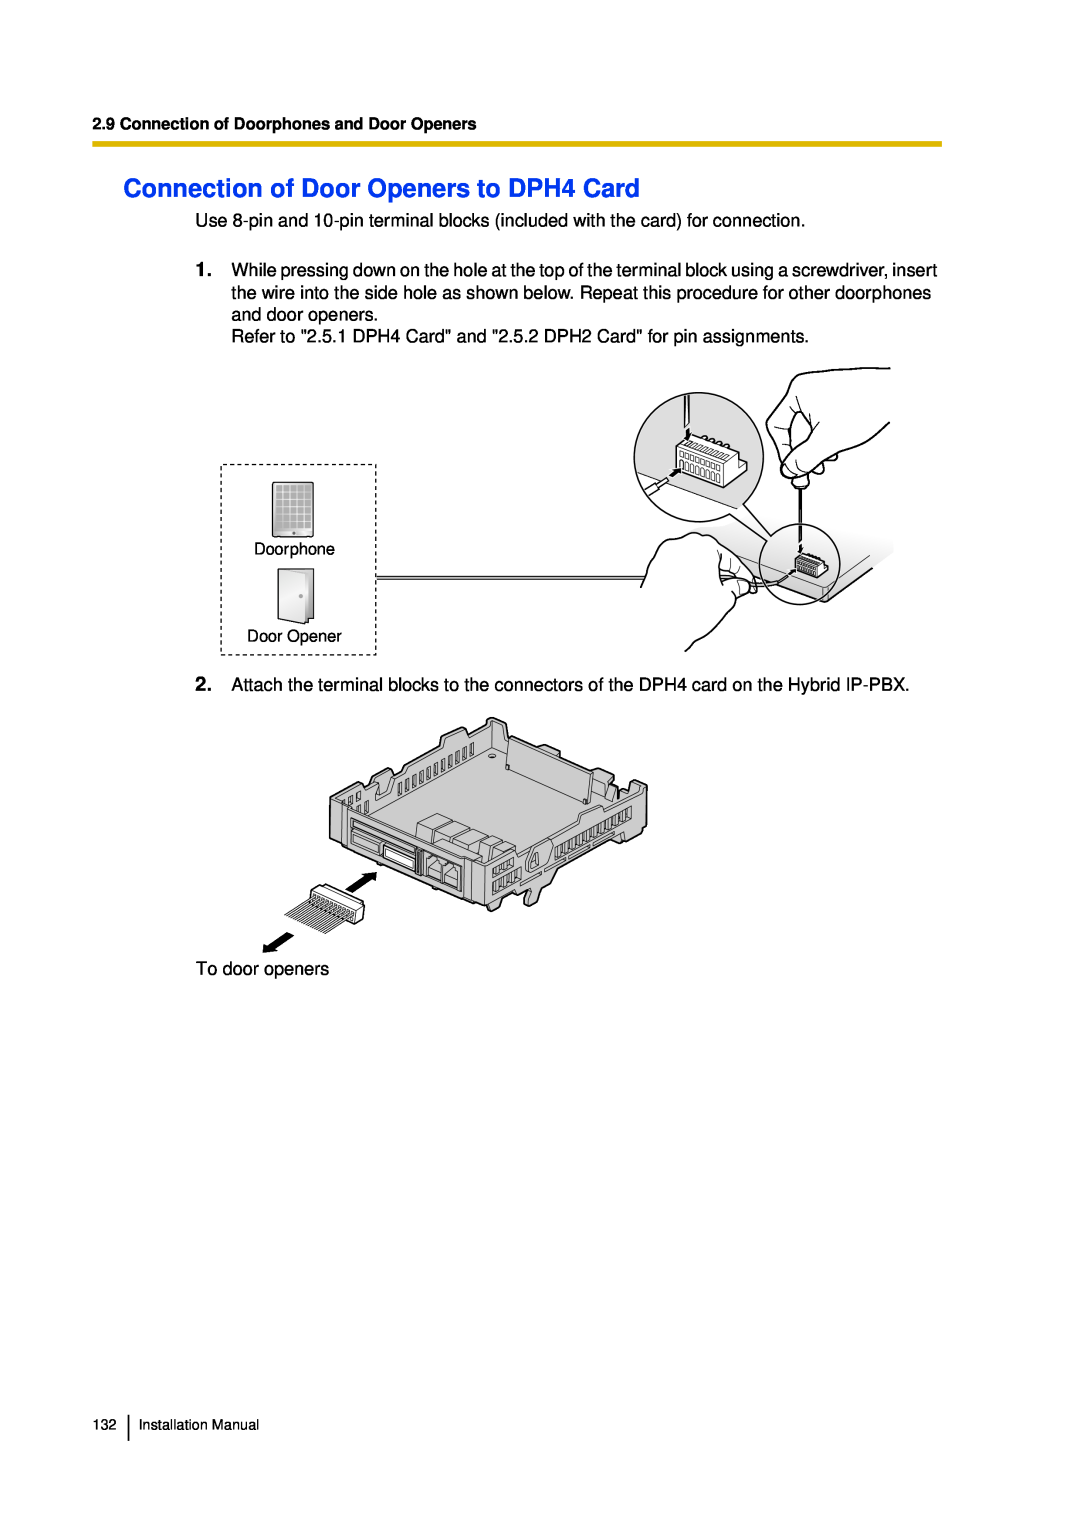 Panasonic KX-TDA30 installation manual Connection of Door Openers to DPH4 Card 